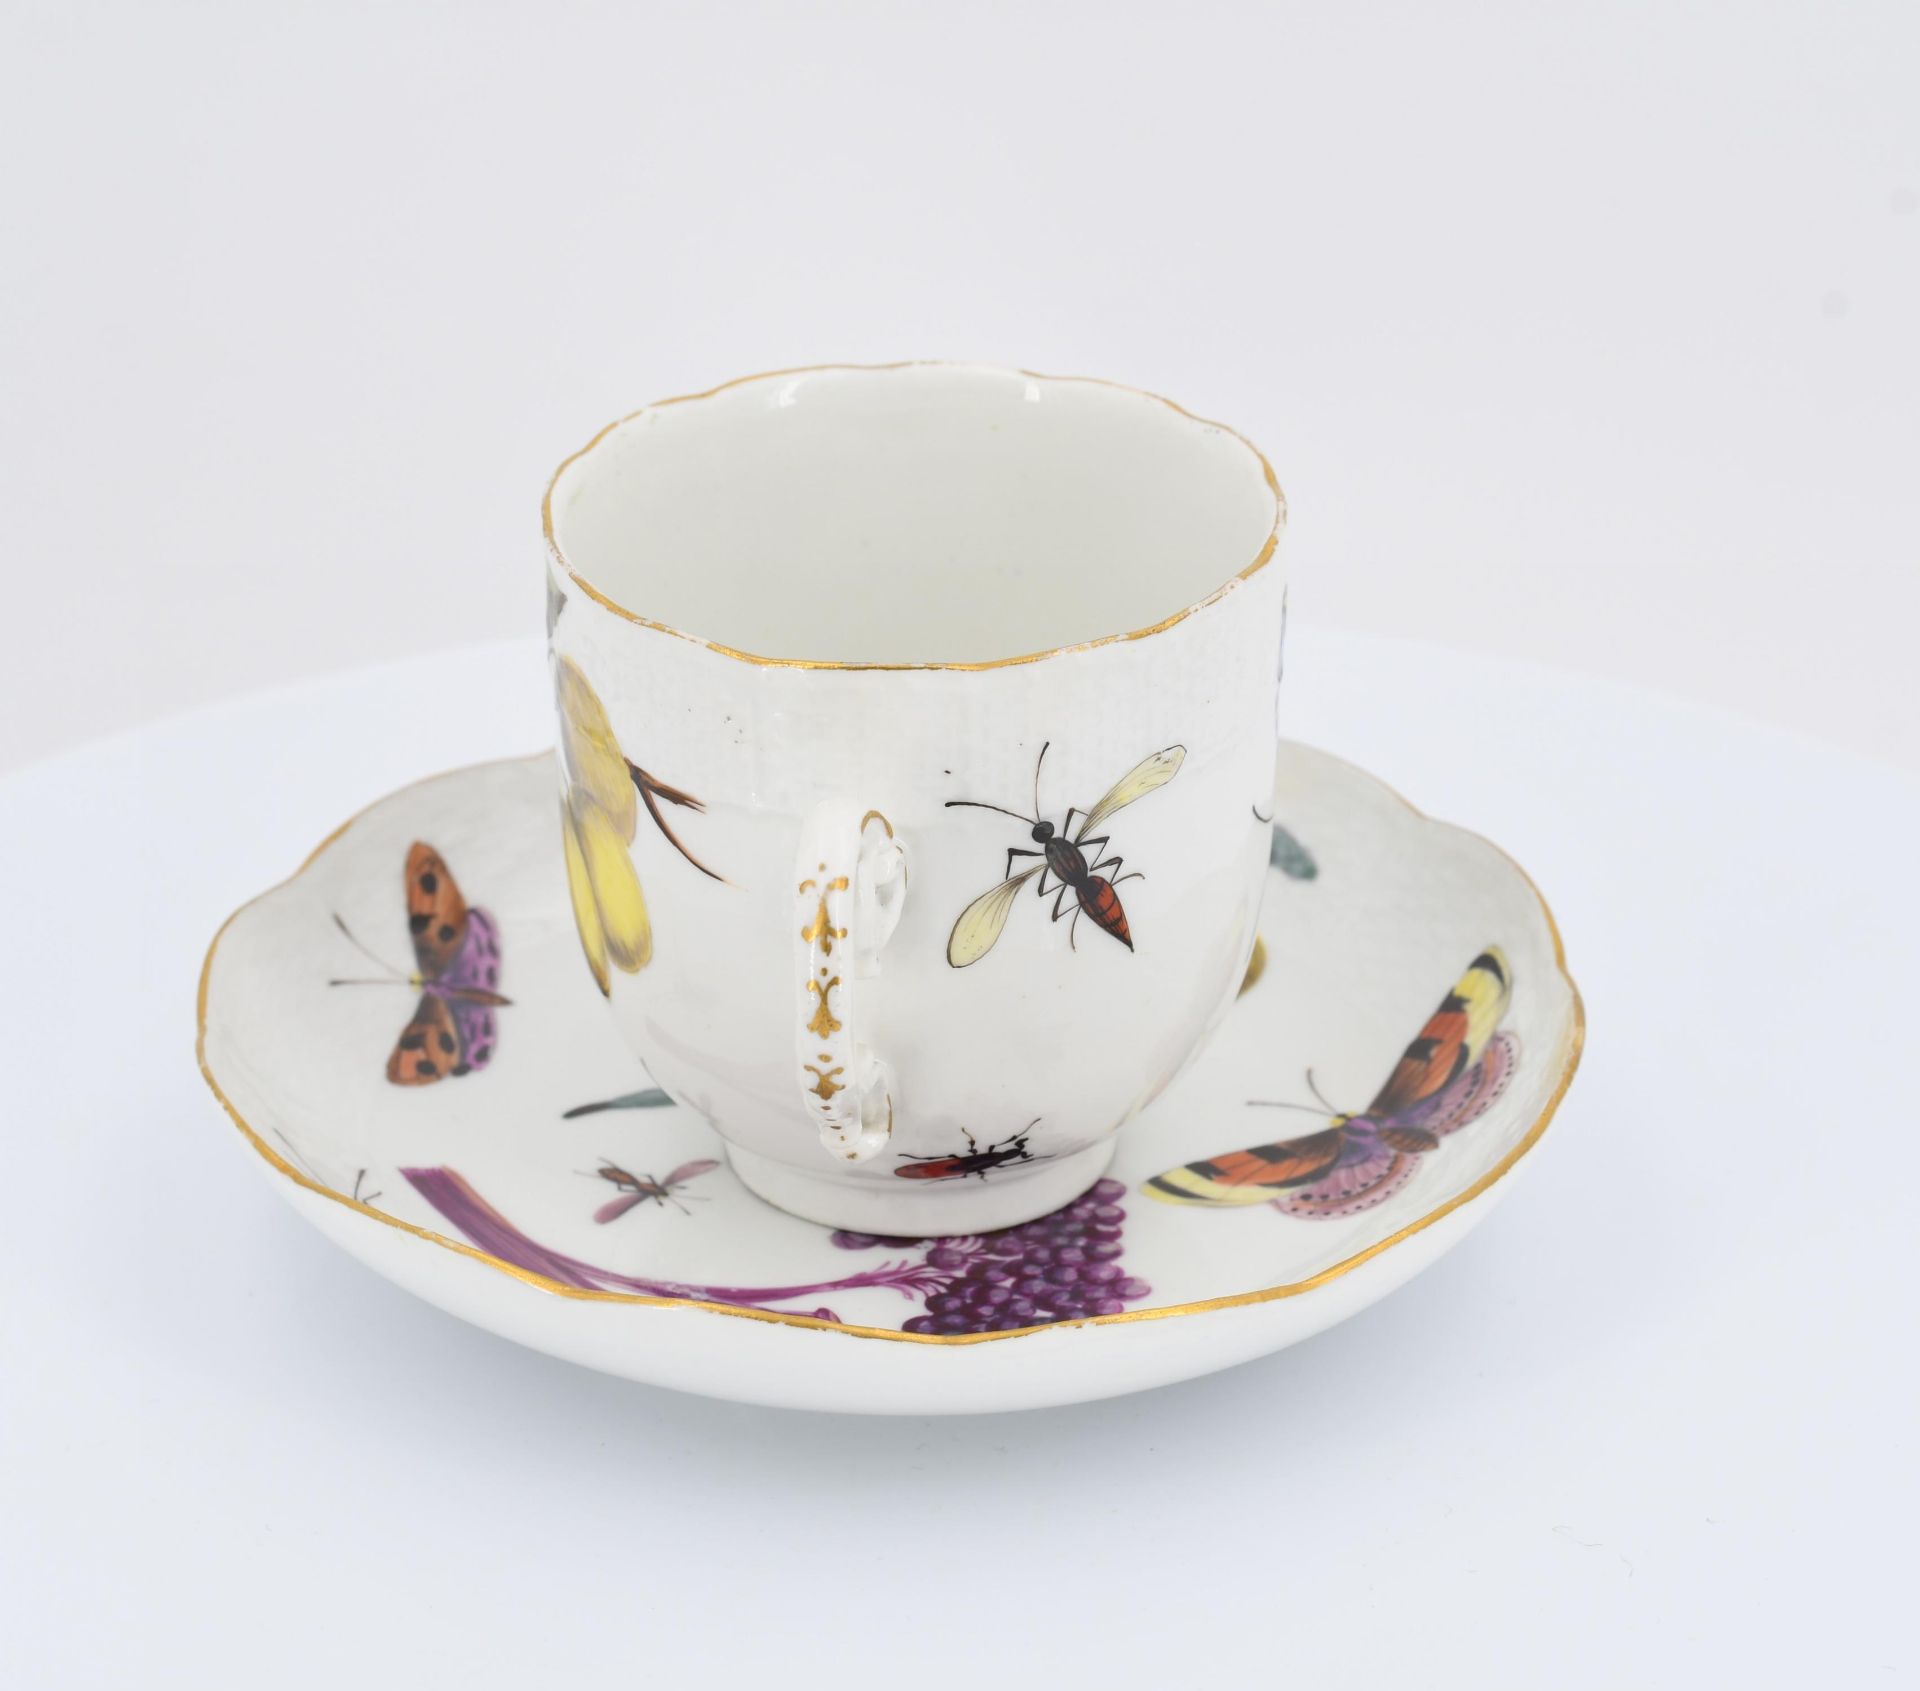 Cup and saucer with fruits and insects - Image 3 of 7